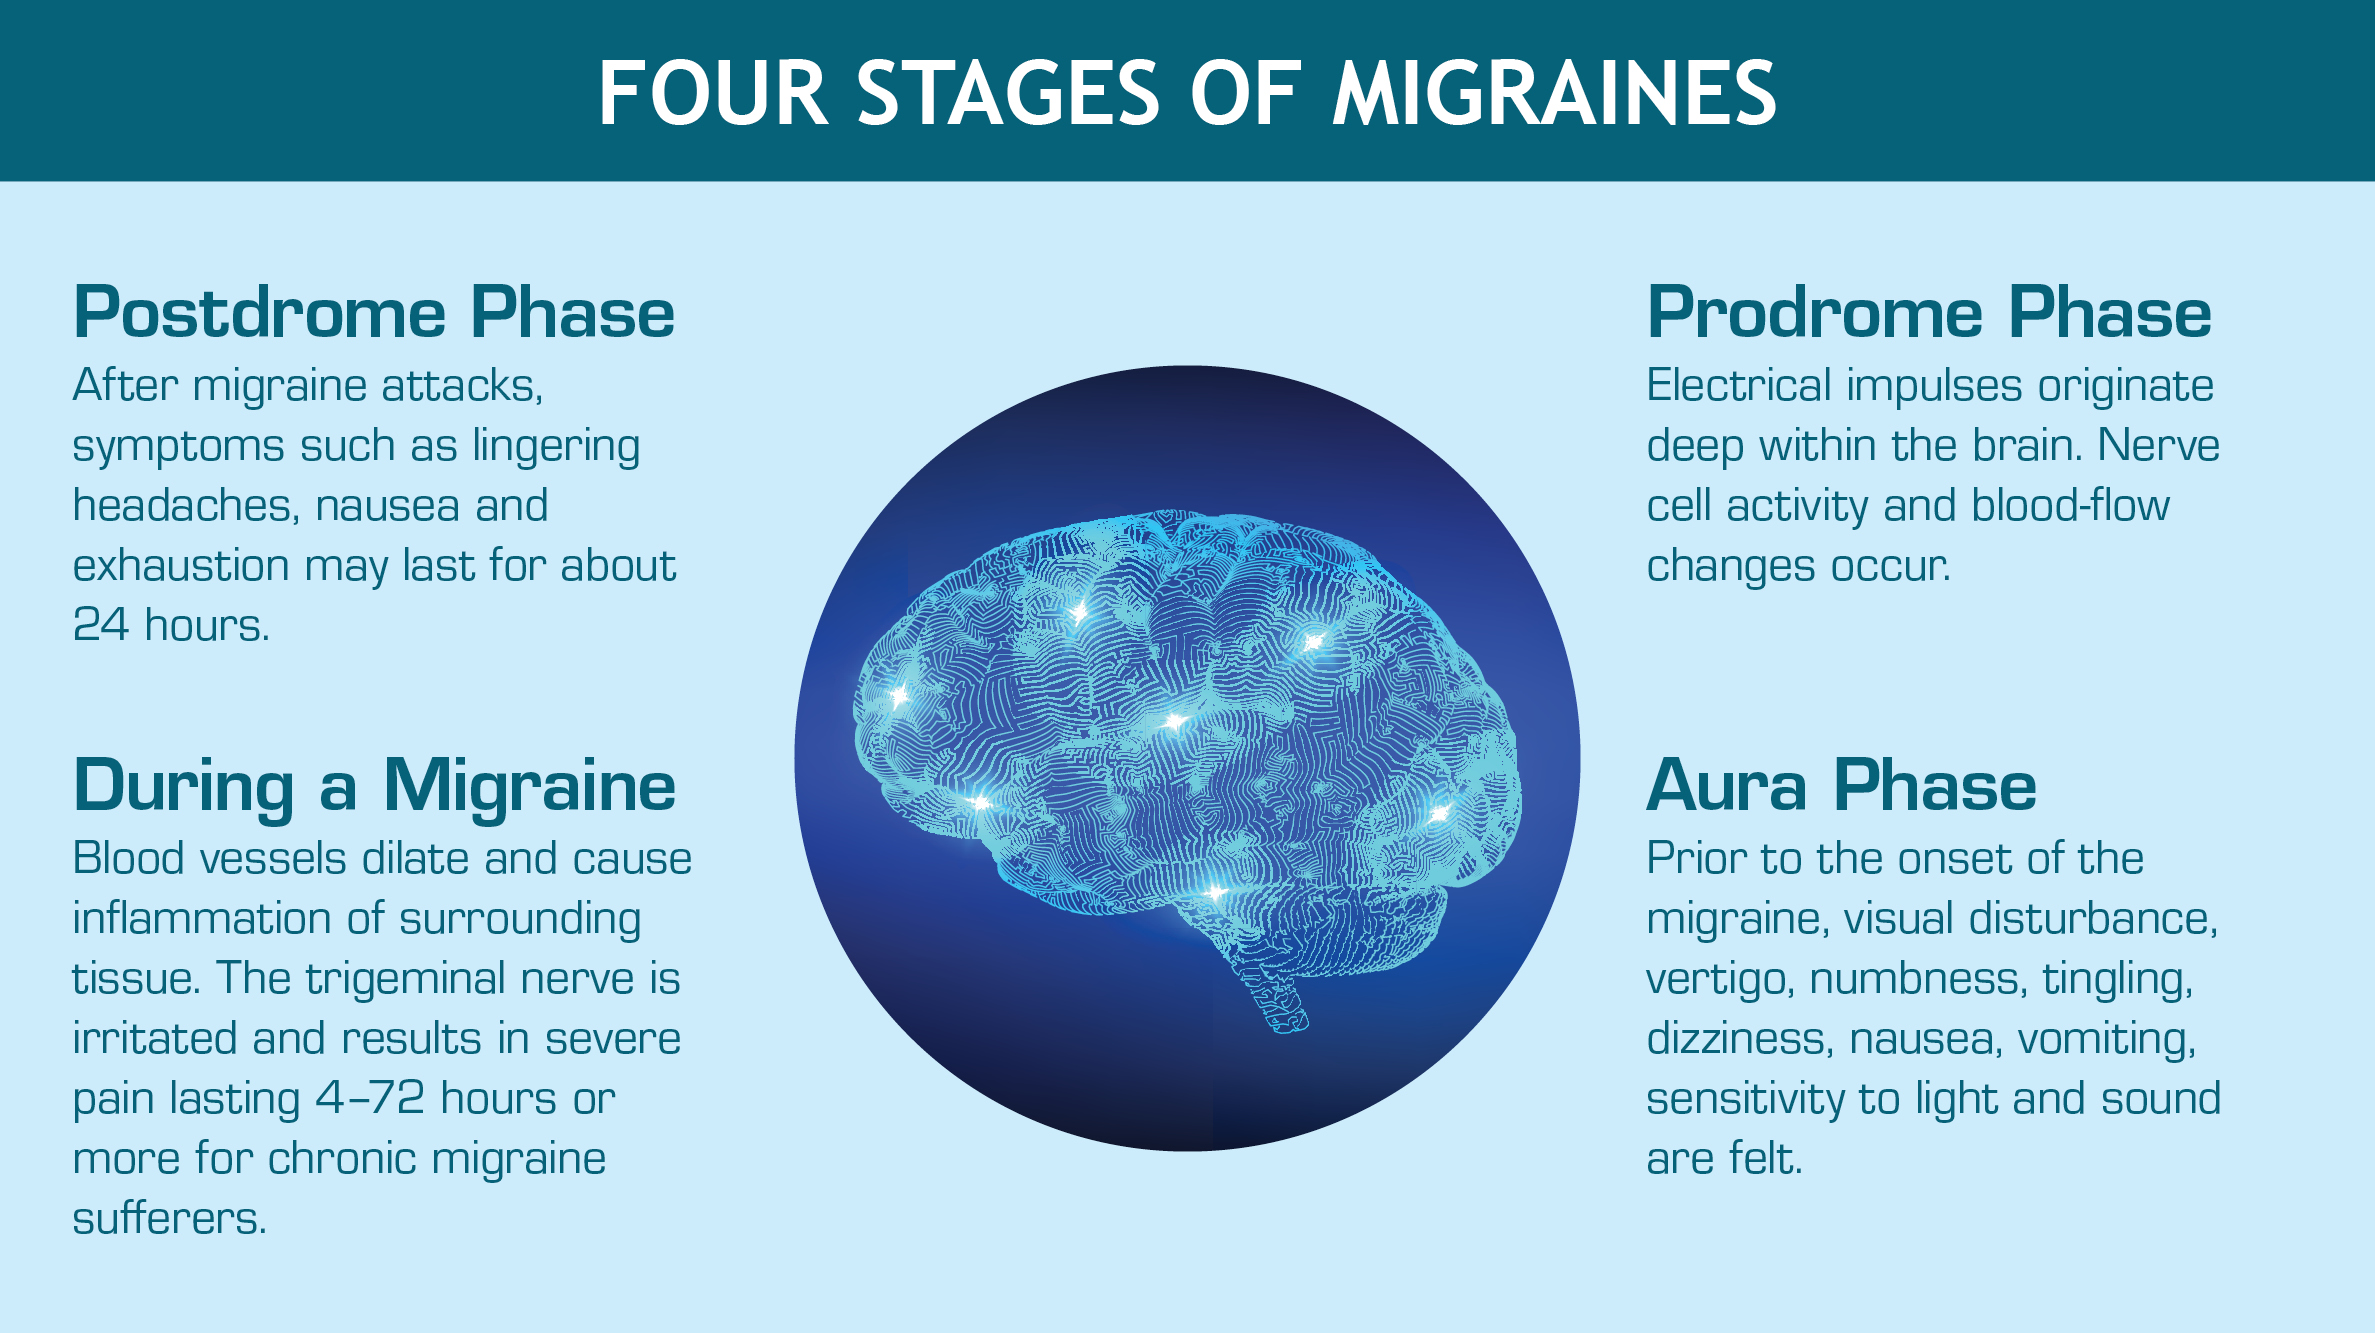 Four Stages of Migraines